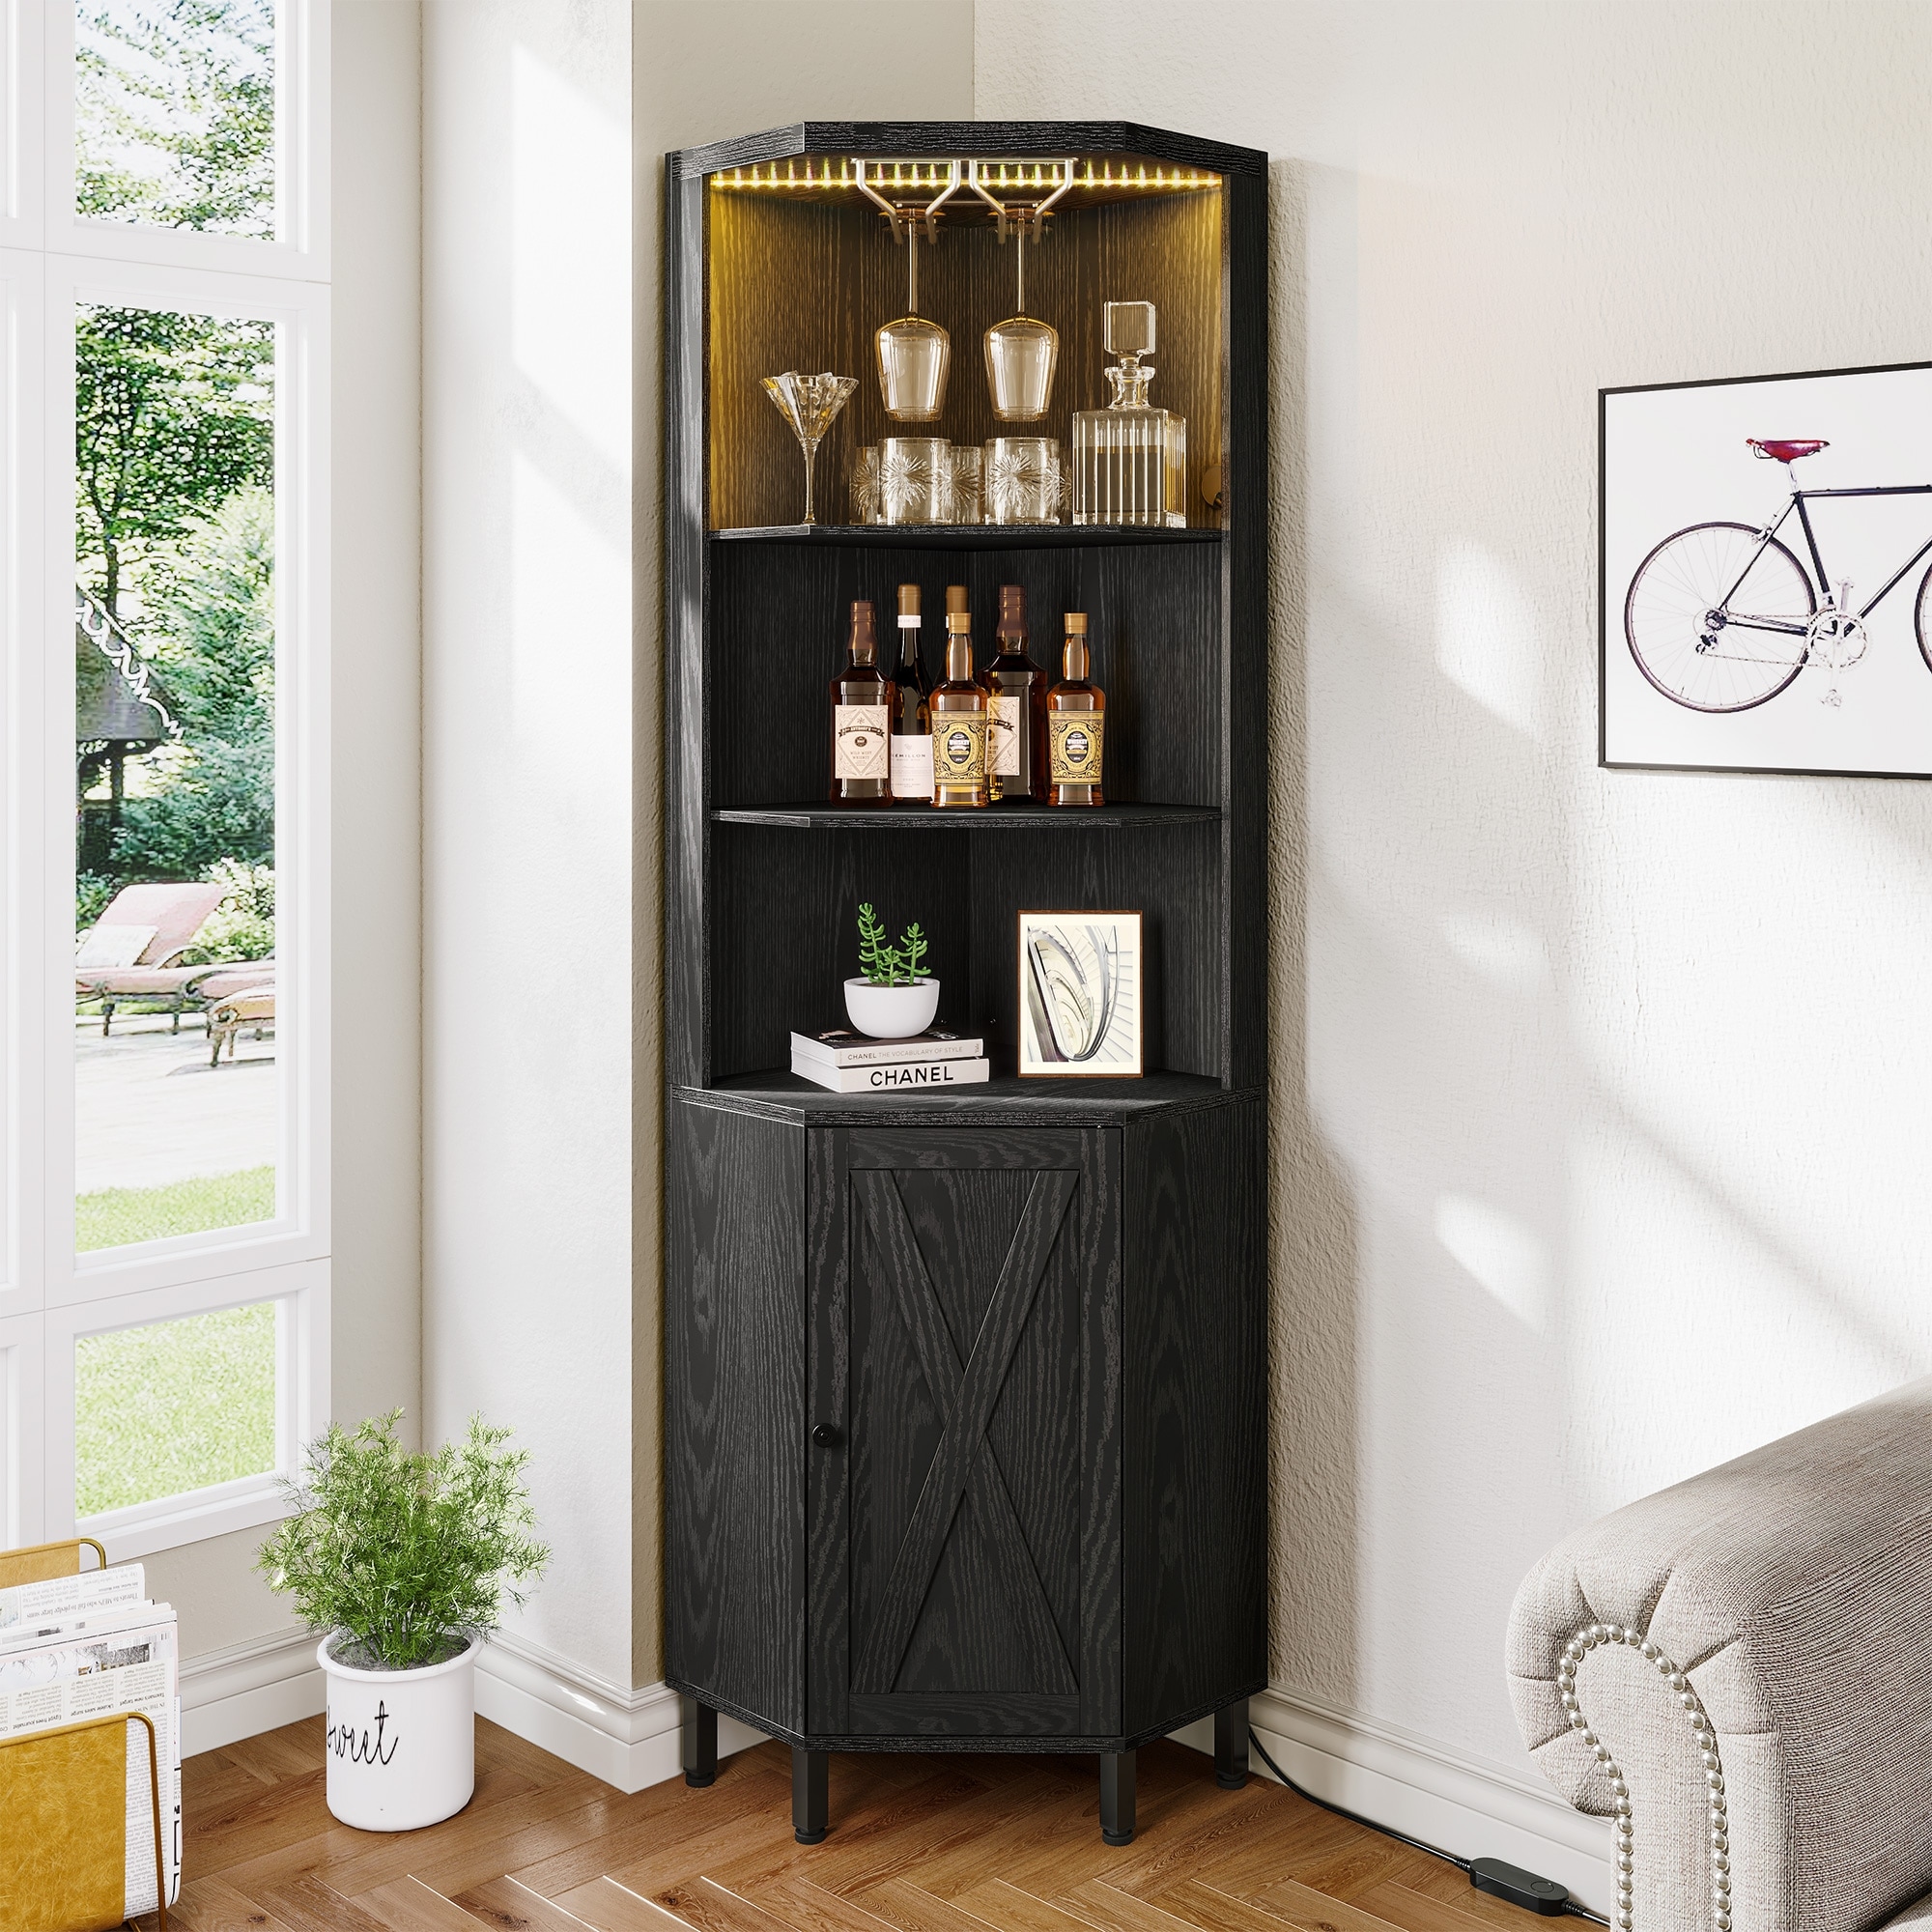 https://ak1.ostkcdn.com/images/products/is/images/direct/dd28deb74e7f5dc299d6043055a797cc15c0e8db/5-Tiers-Corner-Bar-Cabinet-Wine-Rack-Display-Shelves-with-LED-Lights-and-Glass-Holder.jpg